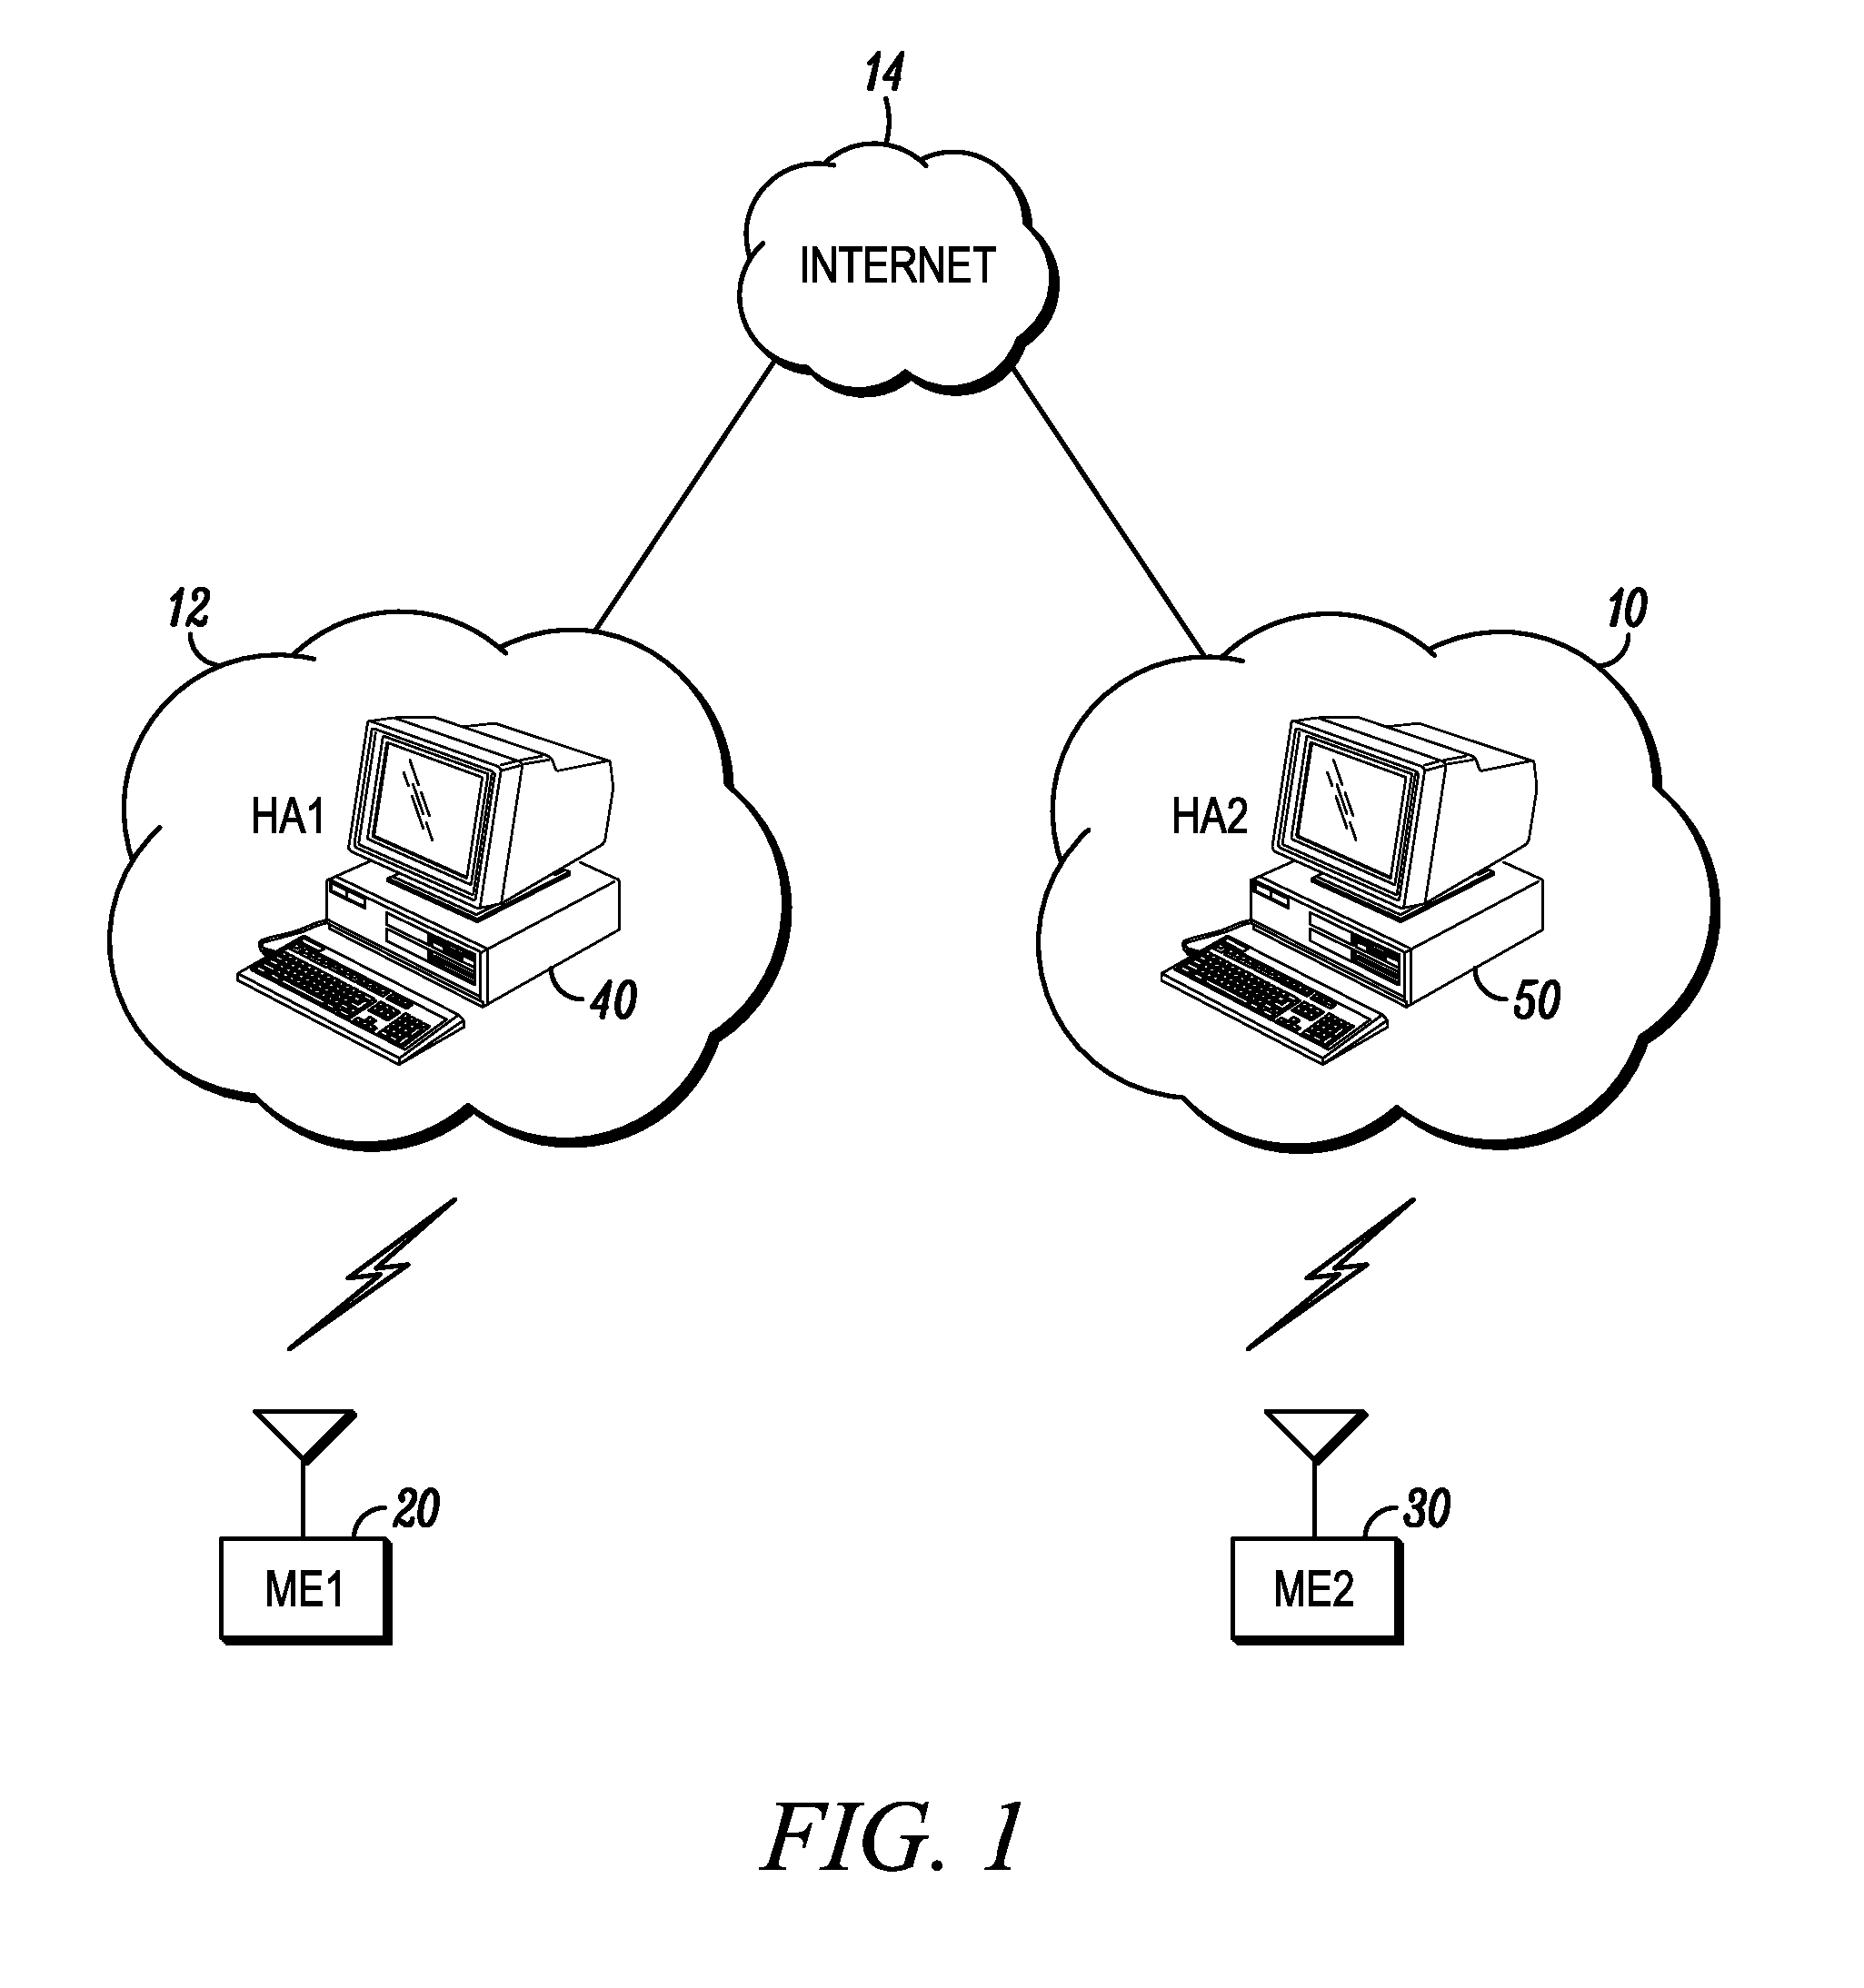 Method for route optimization between mobile entities